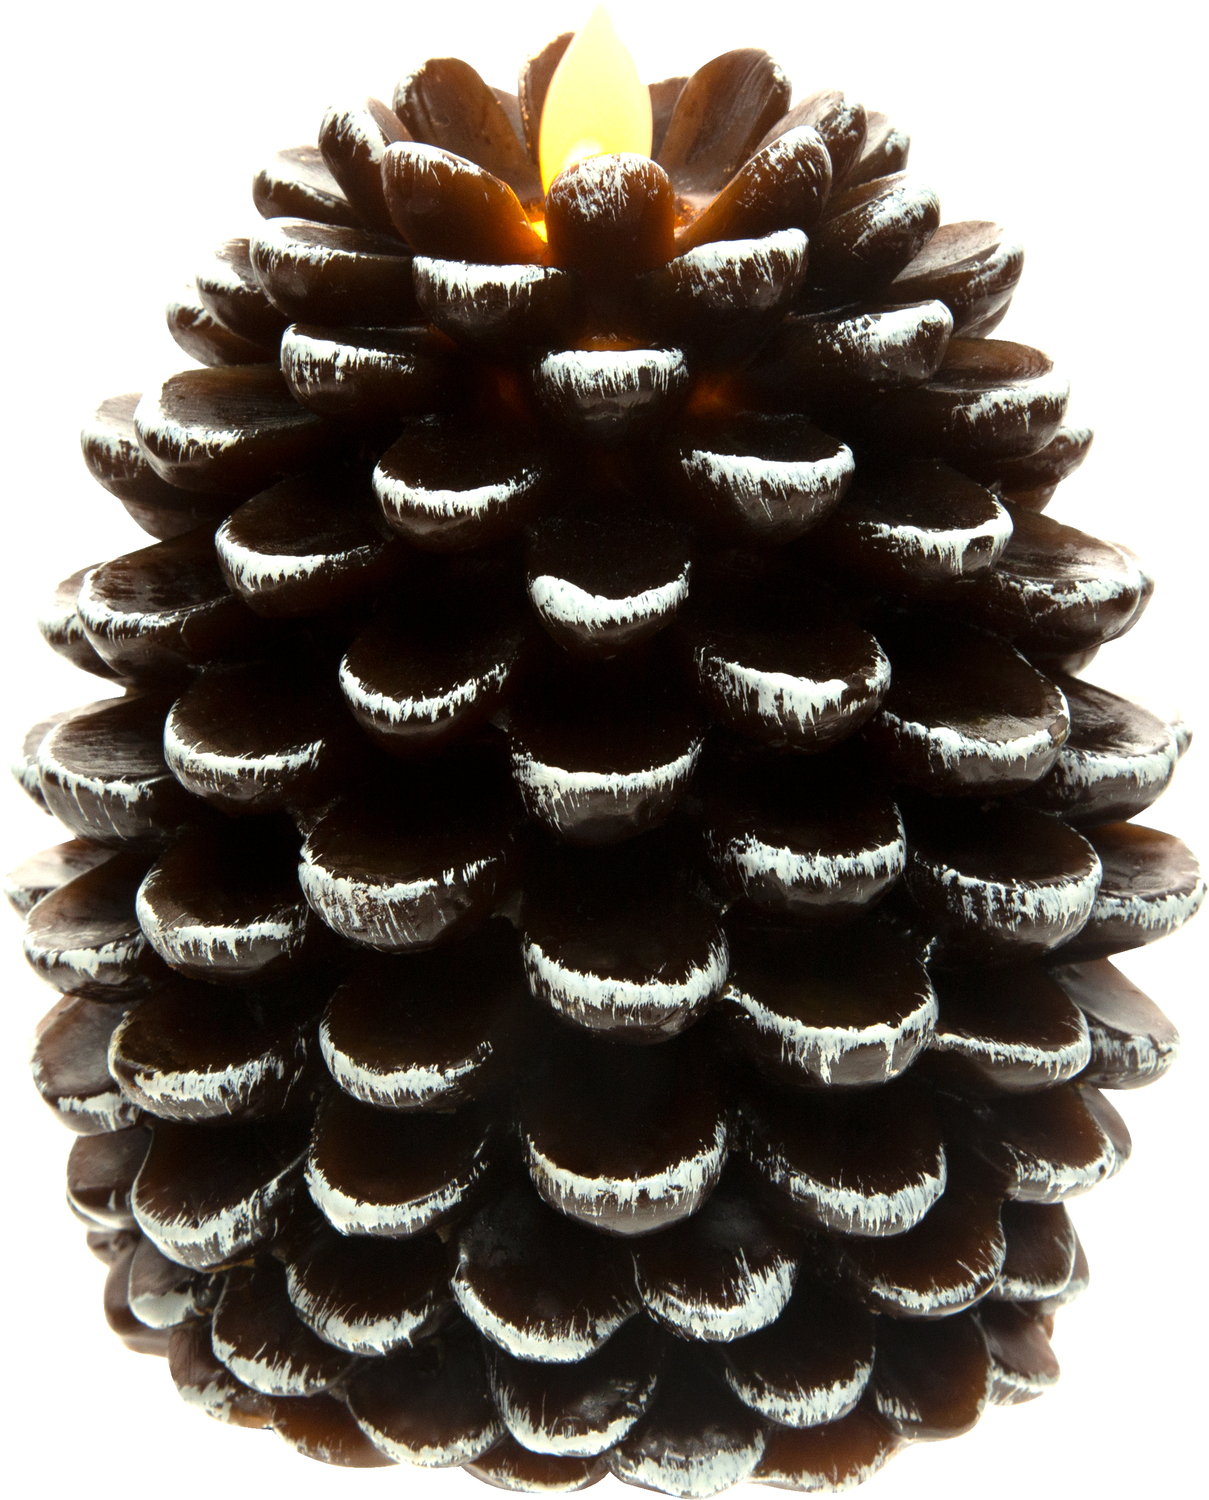 Brown Pine Cone by Pavilion Accessories - Brown Pine Cone - 5" Realistic Flame LED Lit Candle